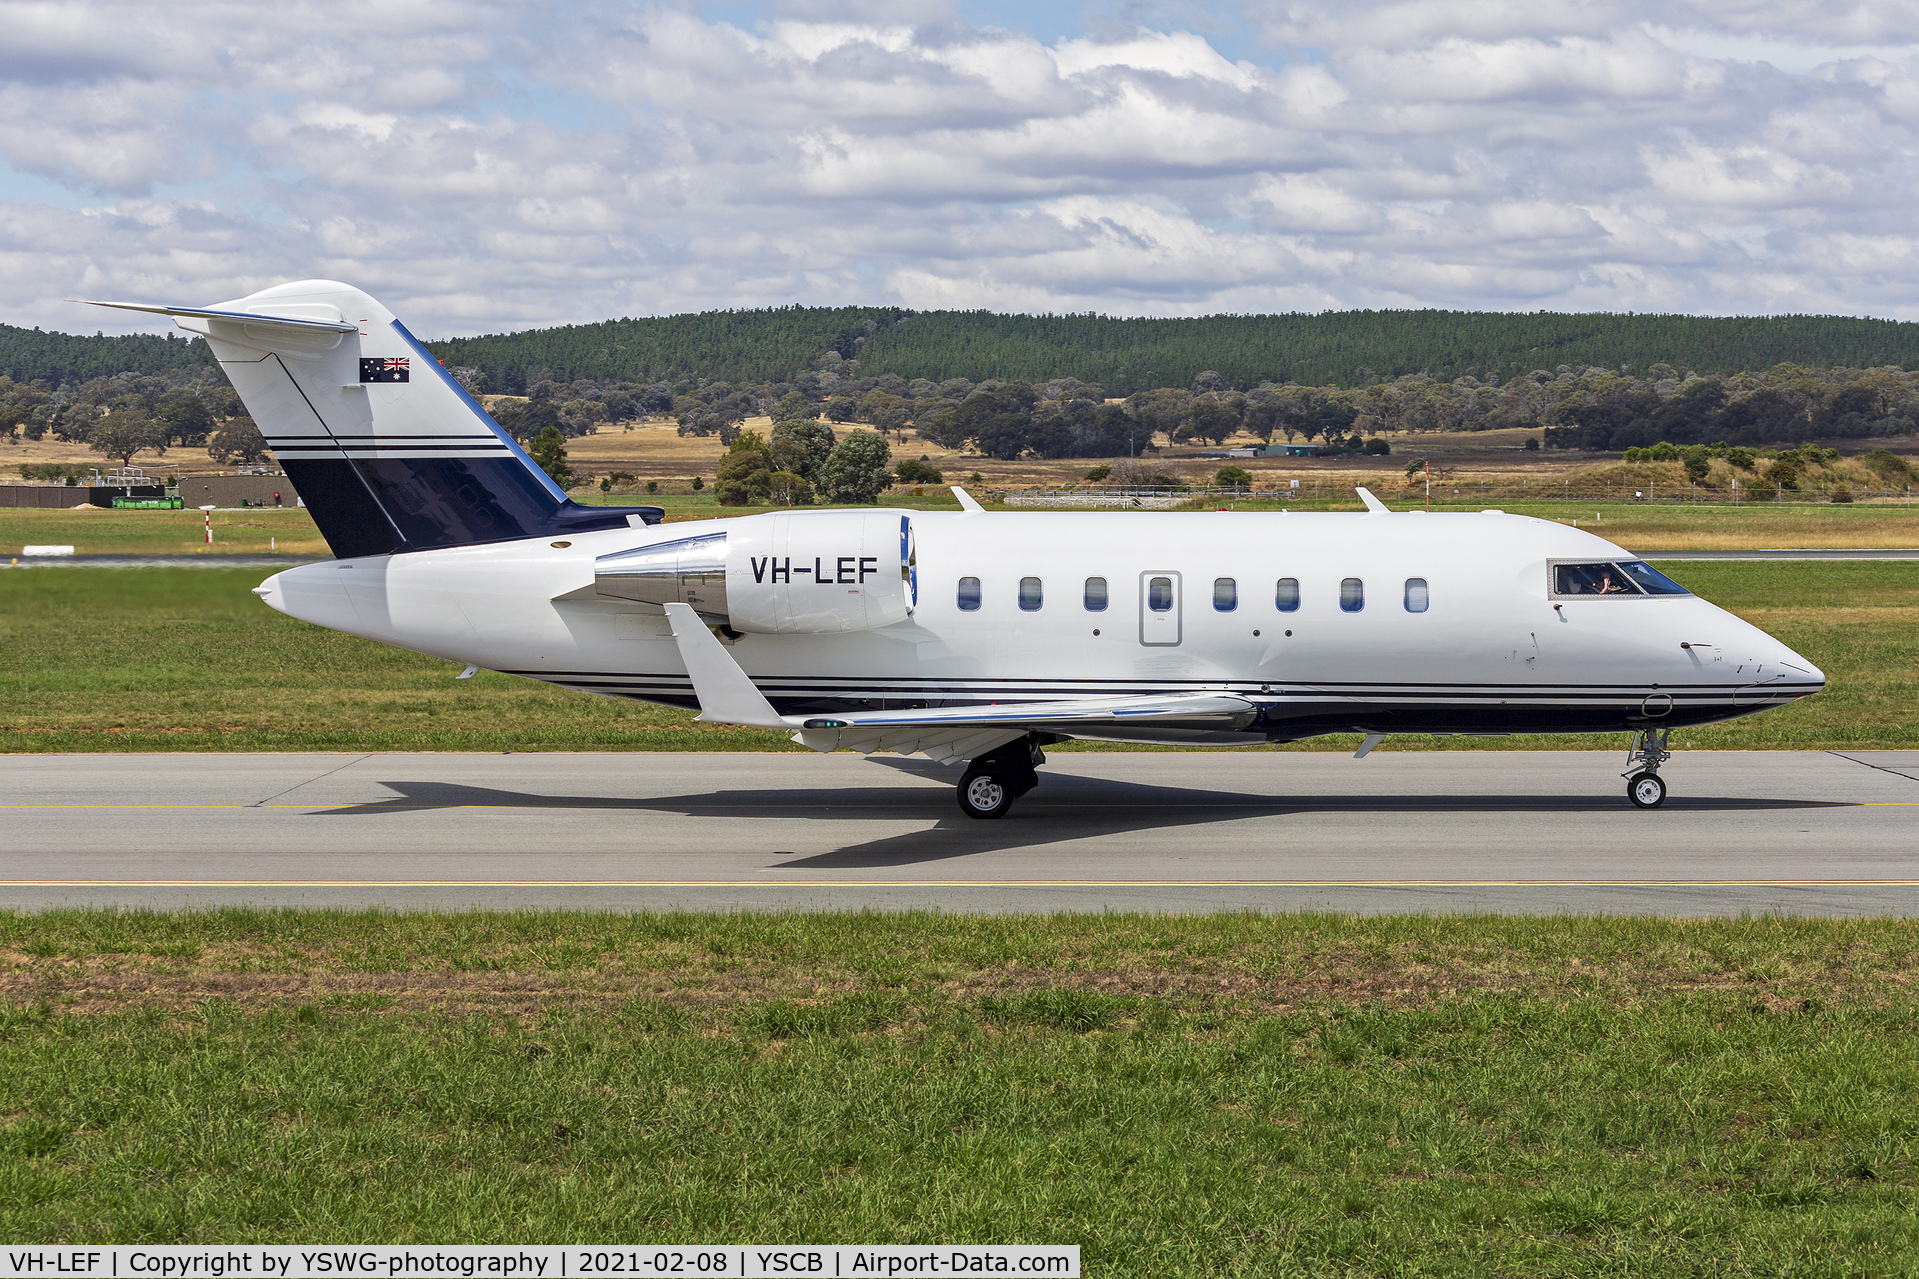 VH-LEF, 2017 Bombardier Challenger 650 (CL-600-2B16) C/N 6100, Air National Australia (VH-LEF) Bombardier Challenger 650 taxiing at Canberra Airport.